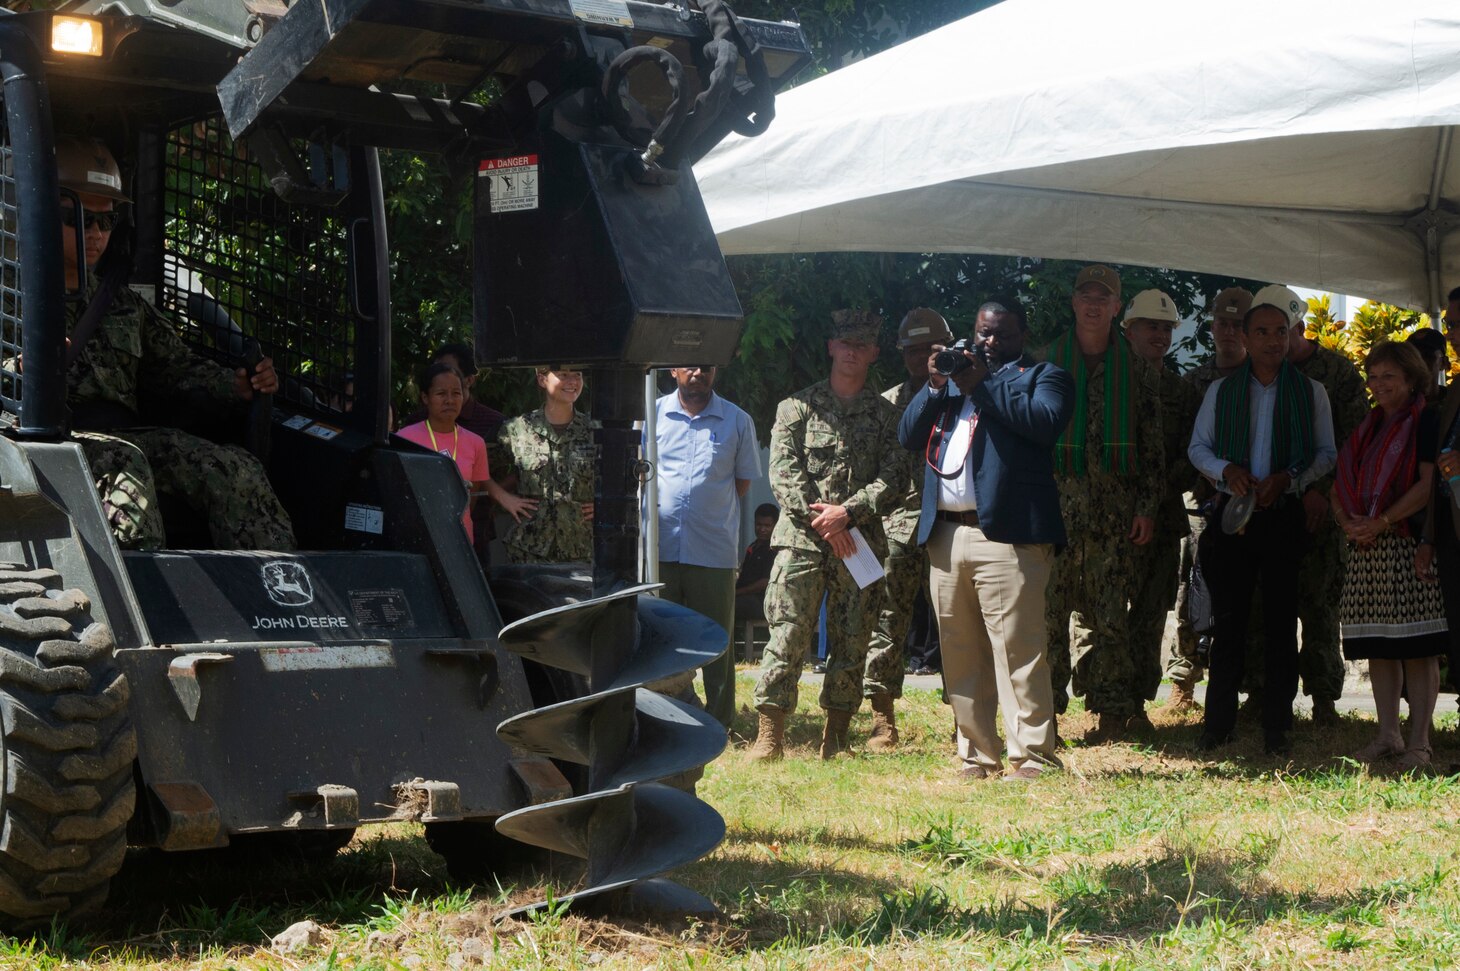 DILI, Timor-Leste (April 24, 2019) – Timorese officials and Pacific Partnership 2019 leaders attend a ground-breaking ceremony at the Timor-Leste National Institute of Health. The event marks the start of construction on the facility that will be used to help train Timorese medical professionals in emergency medical response techniques. Pacific Partnership, now in its 14th iteration, is the largest annual multinational humanitarian assistance and disaster relief preparedness mission conducted in the Indo-Pacific. Each year the mission team works collectively with host and partner nations to enhance regional interoperability and disaster response capabilities, increase security and stability in the region, and foster new and enduring friendships in the Indo-Pacific.